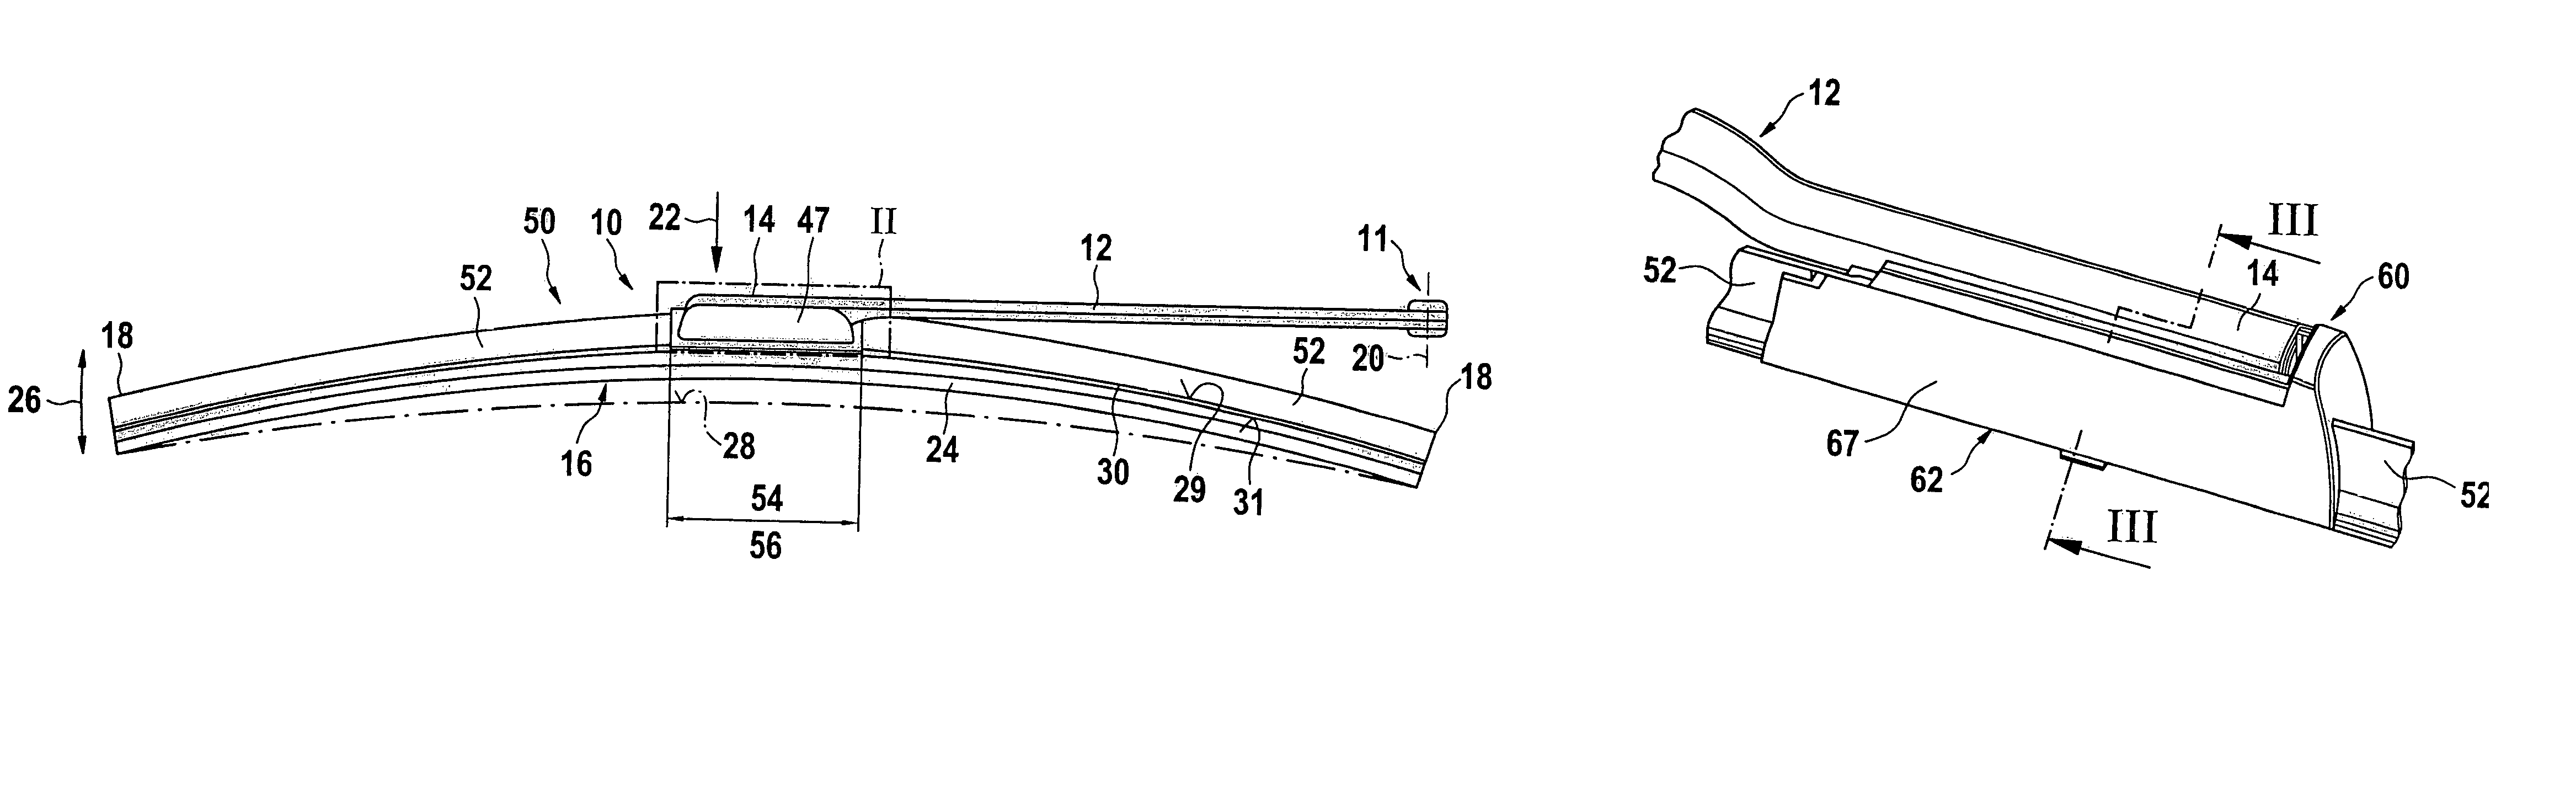 Wiper lever with a driven wiper arm and a wiper blade linked to it for cleaning the windows of motor vehicles in particular